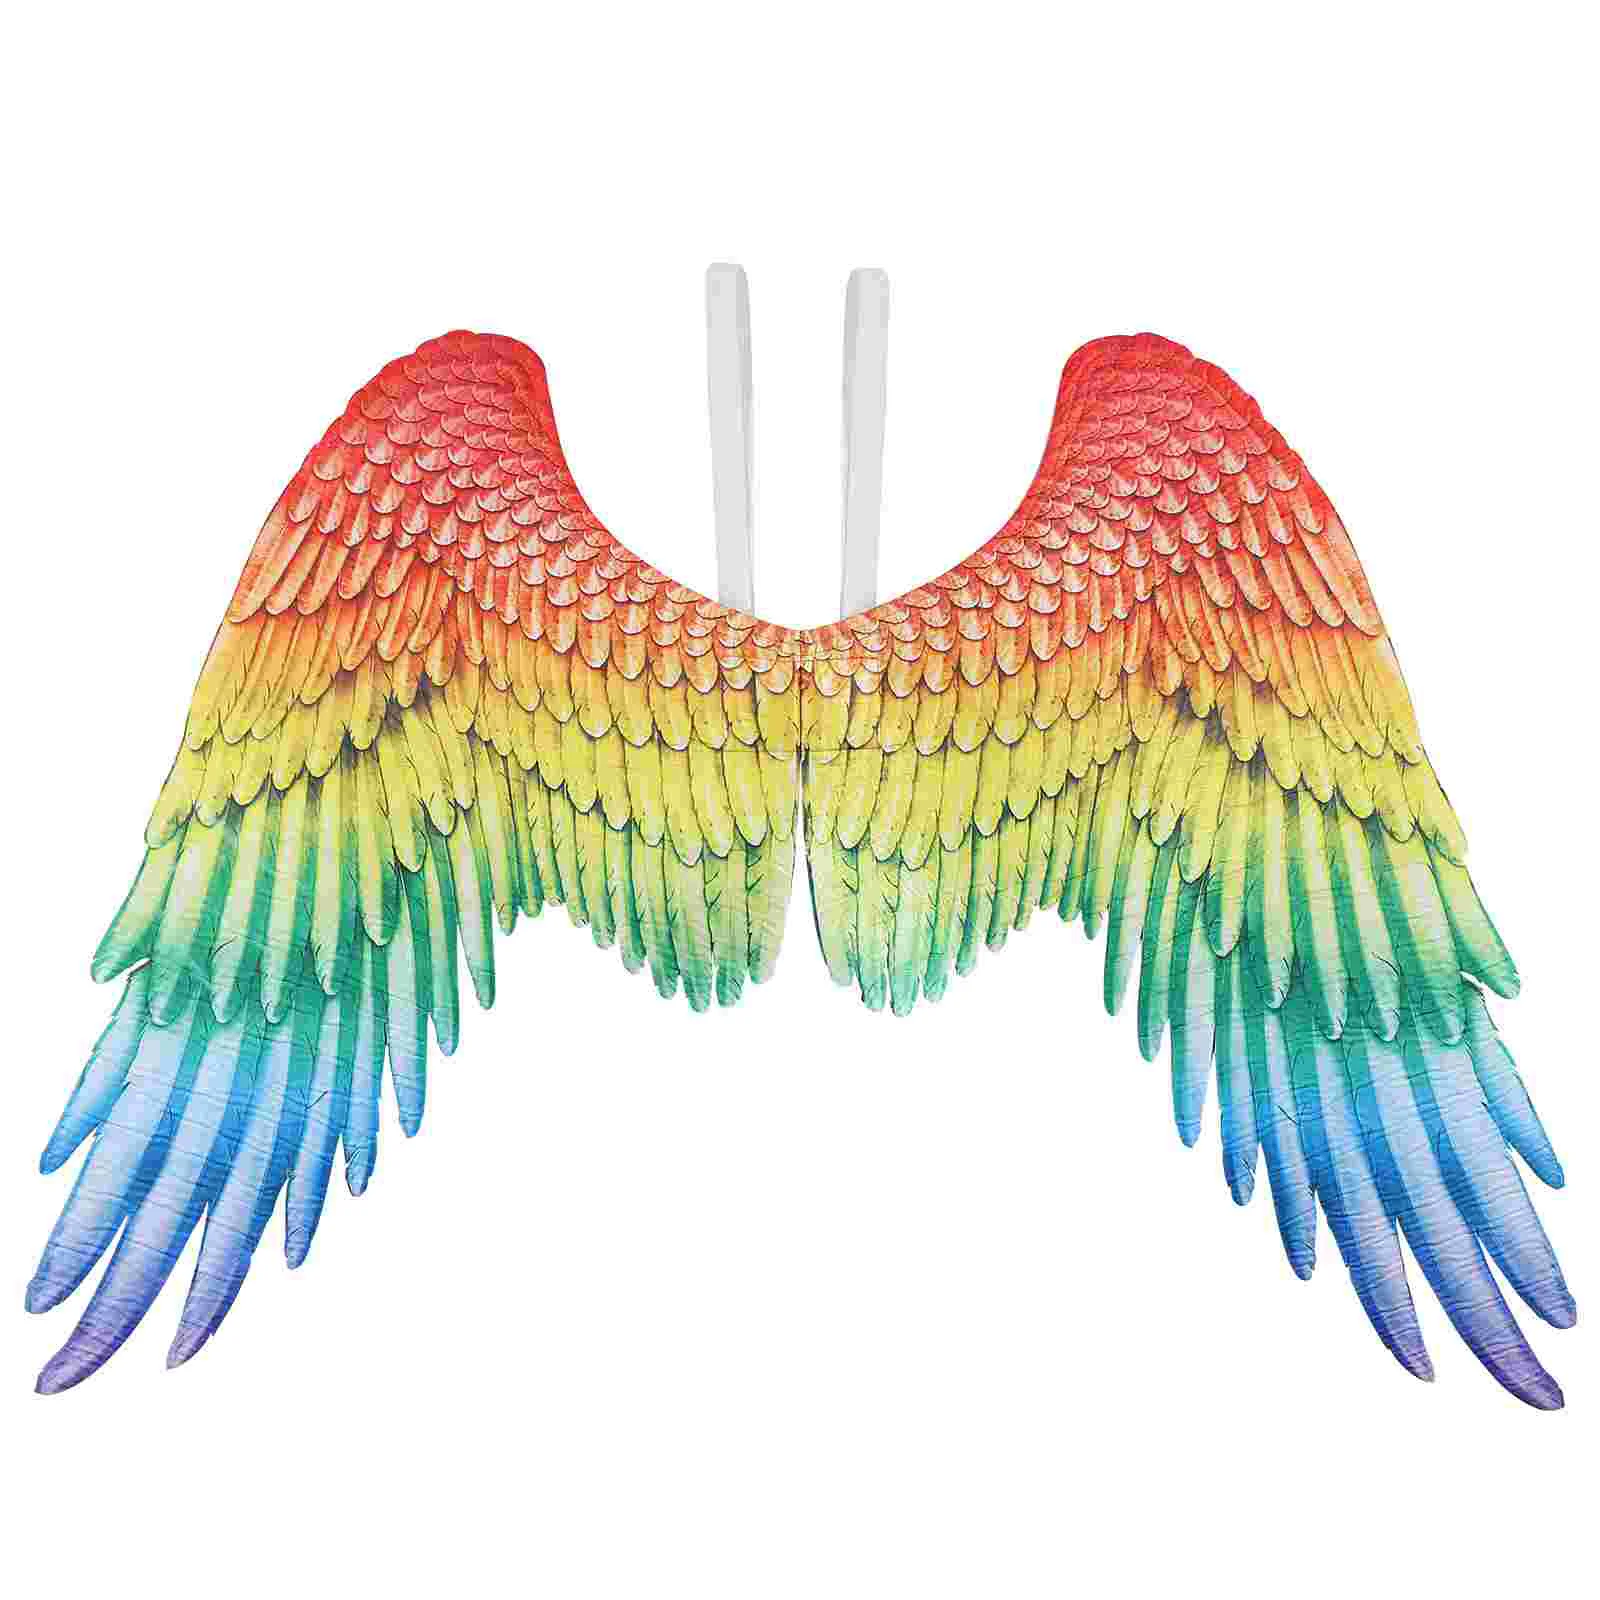 

Amosfun Colorful Angel Wing Cosplay Performance Prop Rainbow Wings Spread Angel Wing Carnival Fancy Dress Accessory